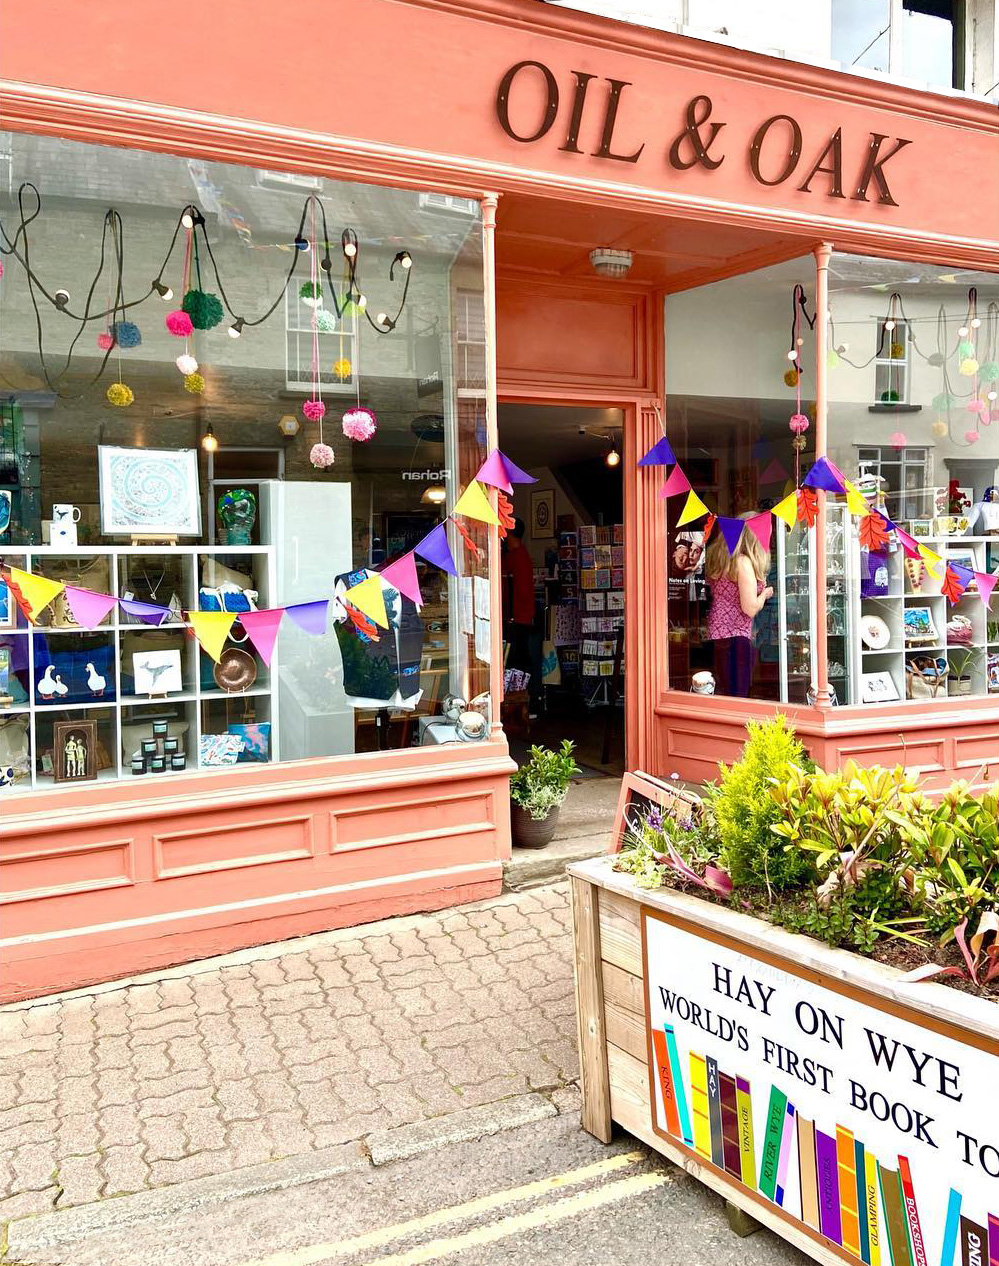 NEWS | Gift Shop and Gallery Supports Local Makers and Artists in Hay-on-Wye